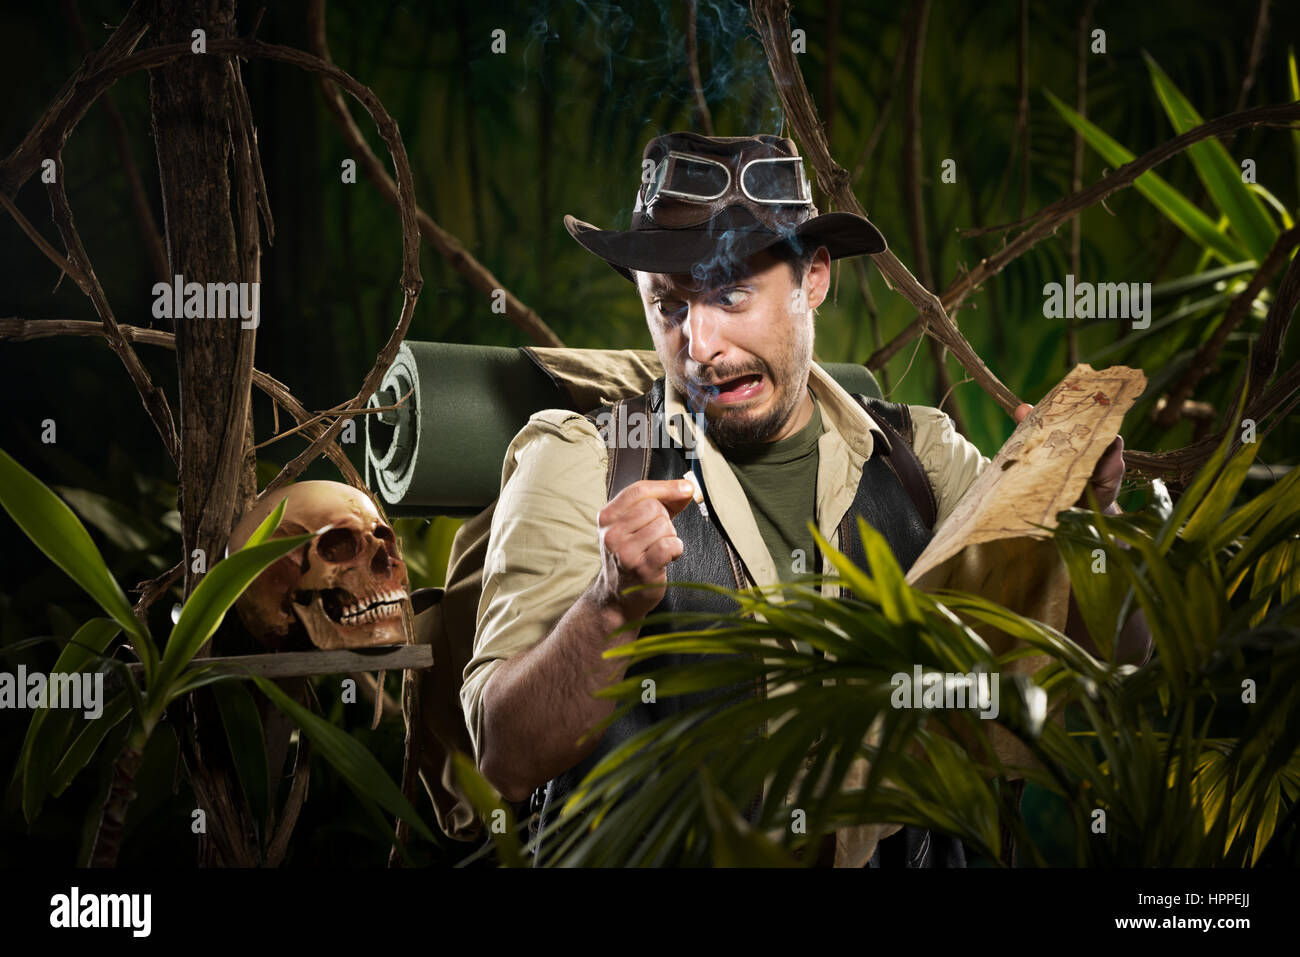 Explorer with map smoking in the jungle and finding a human skull. Stock Photo